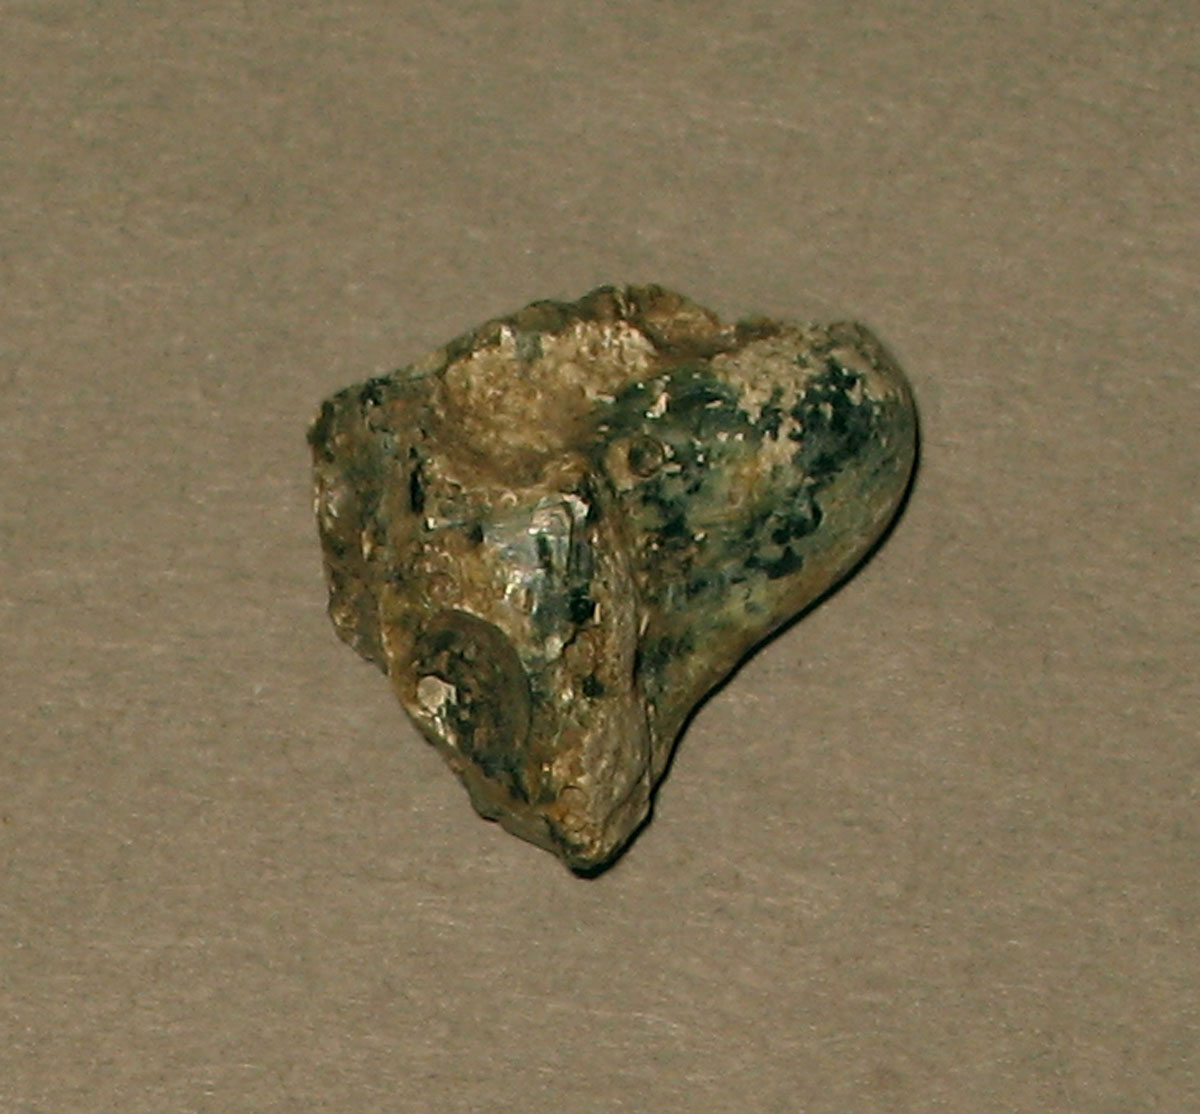 Glass - Frit or cullet fragment